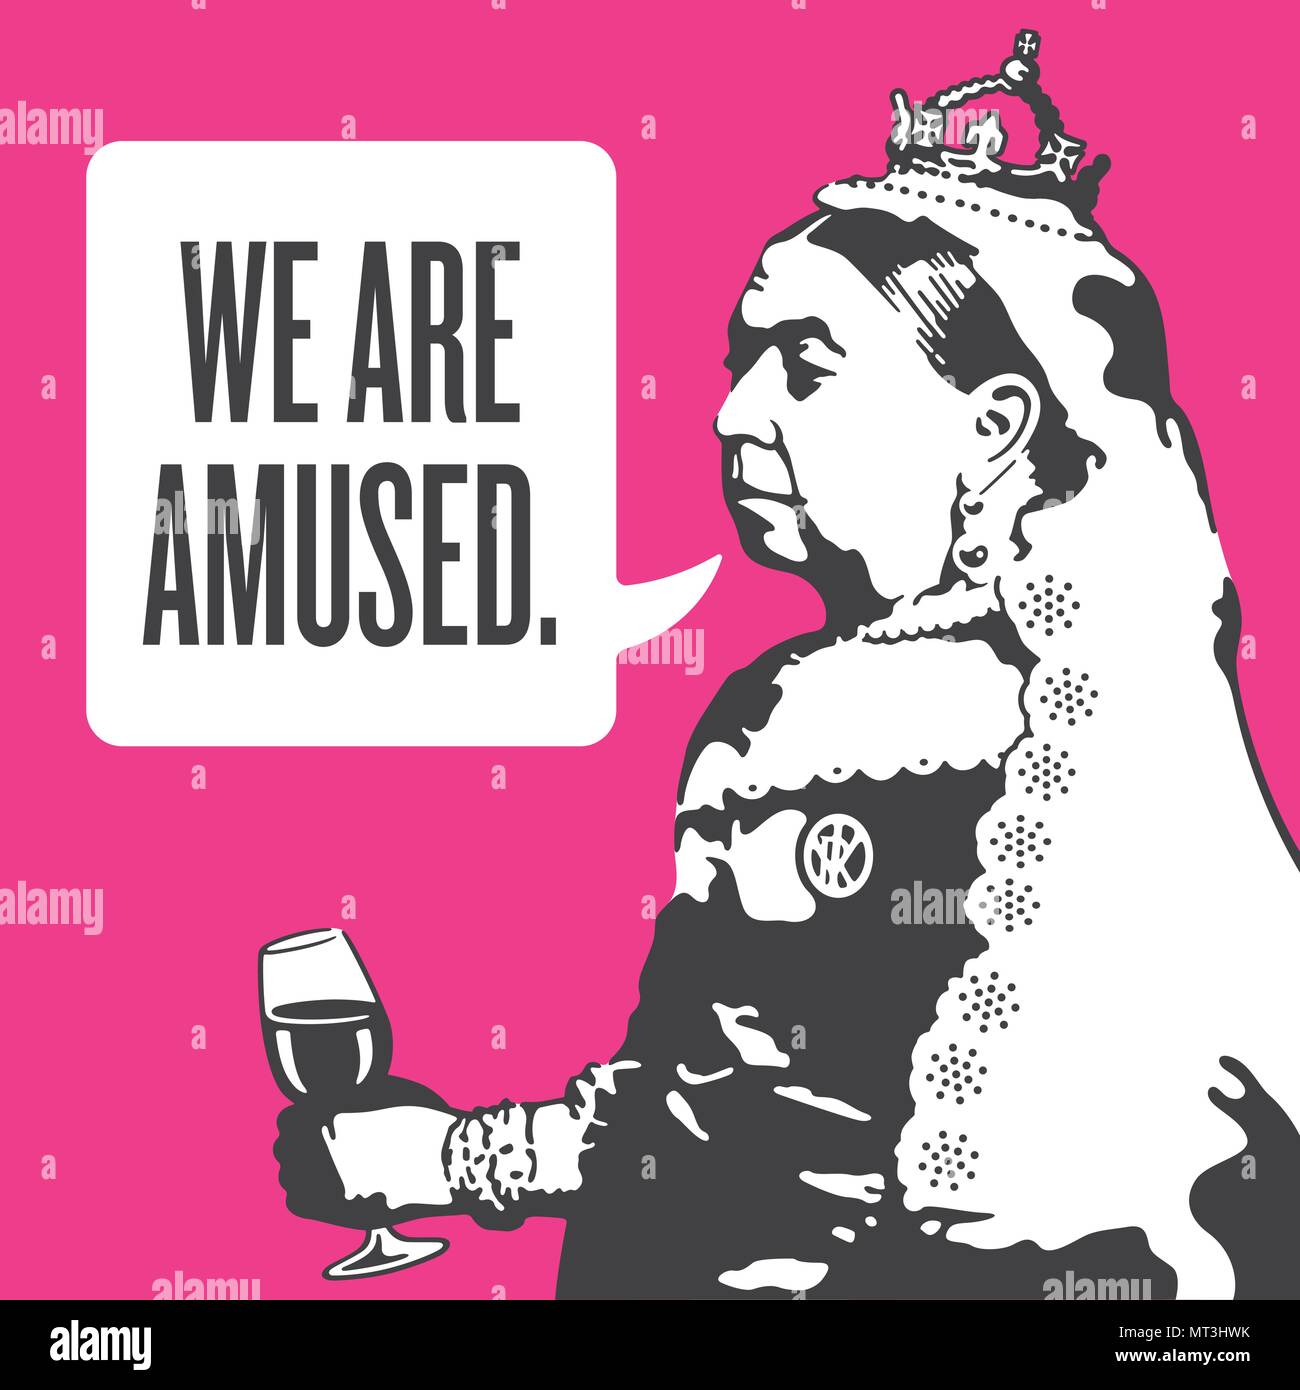 Queen Victoria We Are Amused Illustration. Vector design of Queen Victoria holding a glass of wine and saying We Are Amused. Stock Vector